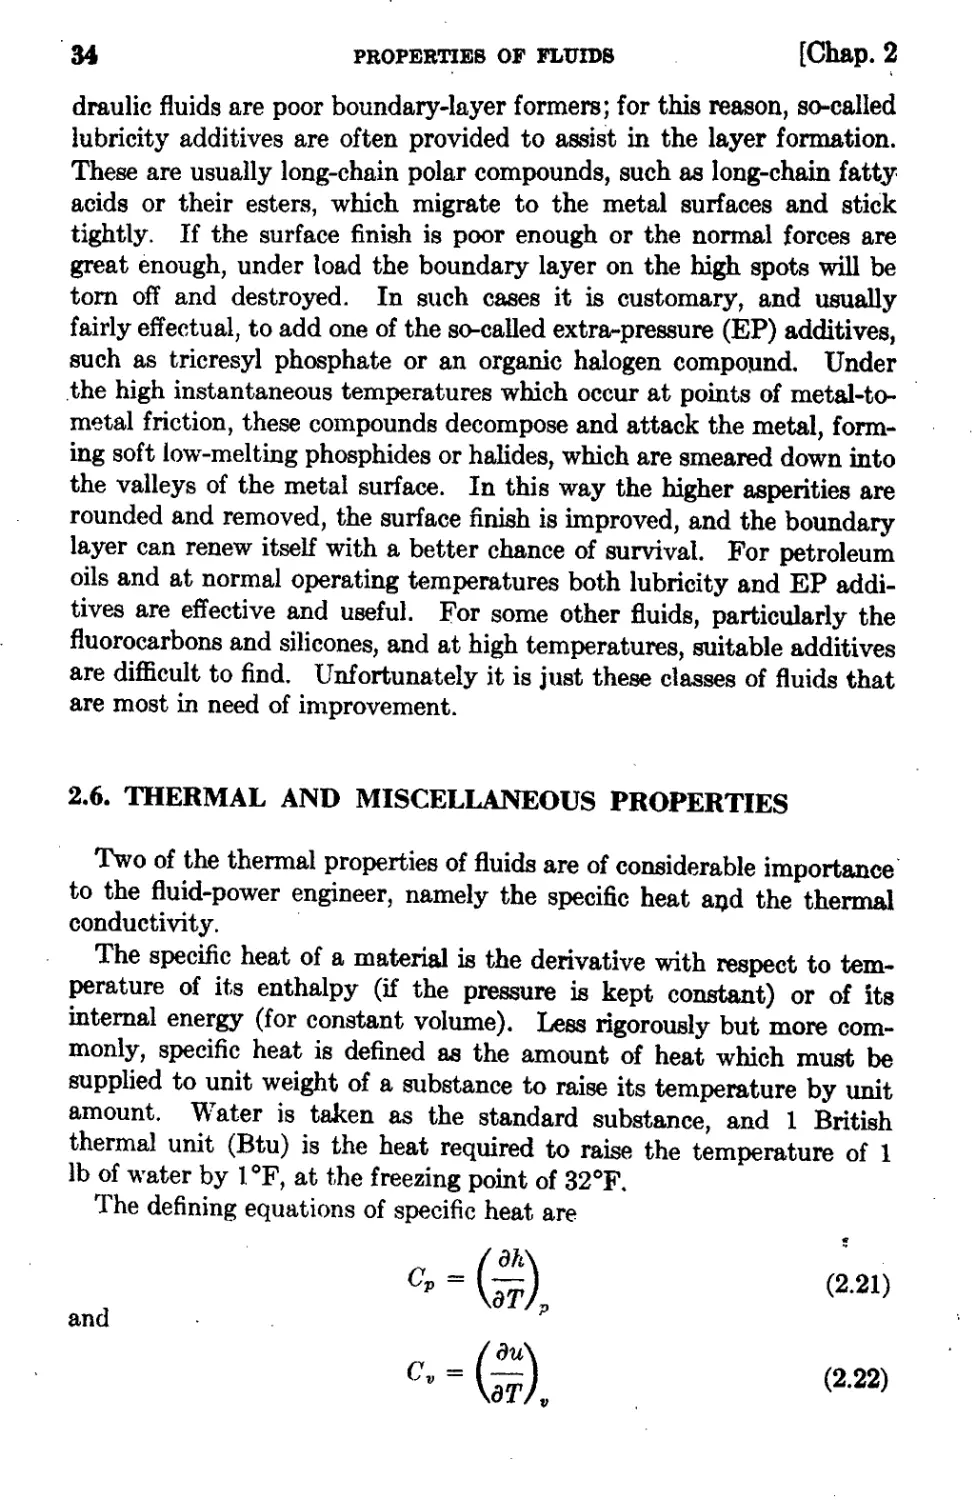 2.6 Thermal and Miscellaneous Properties